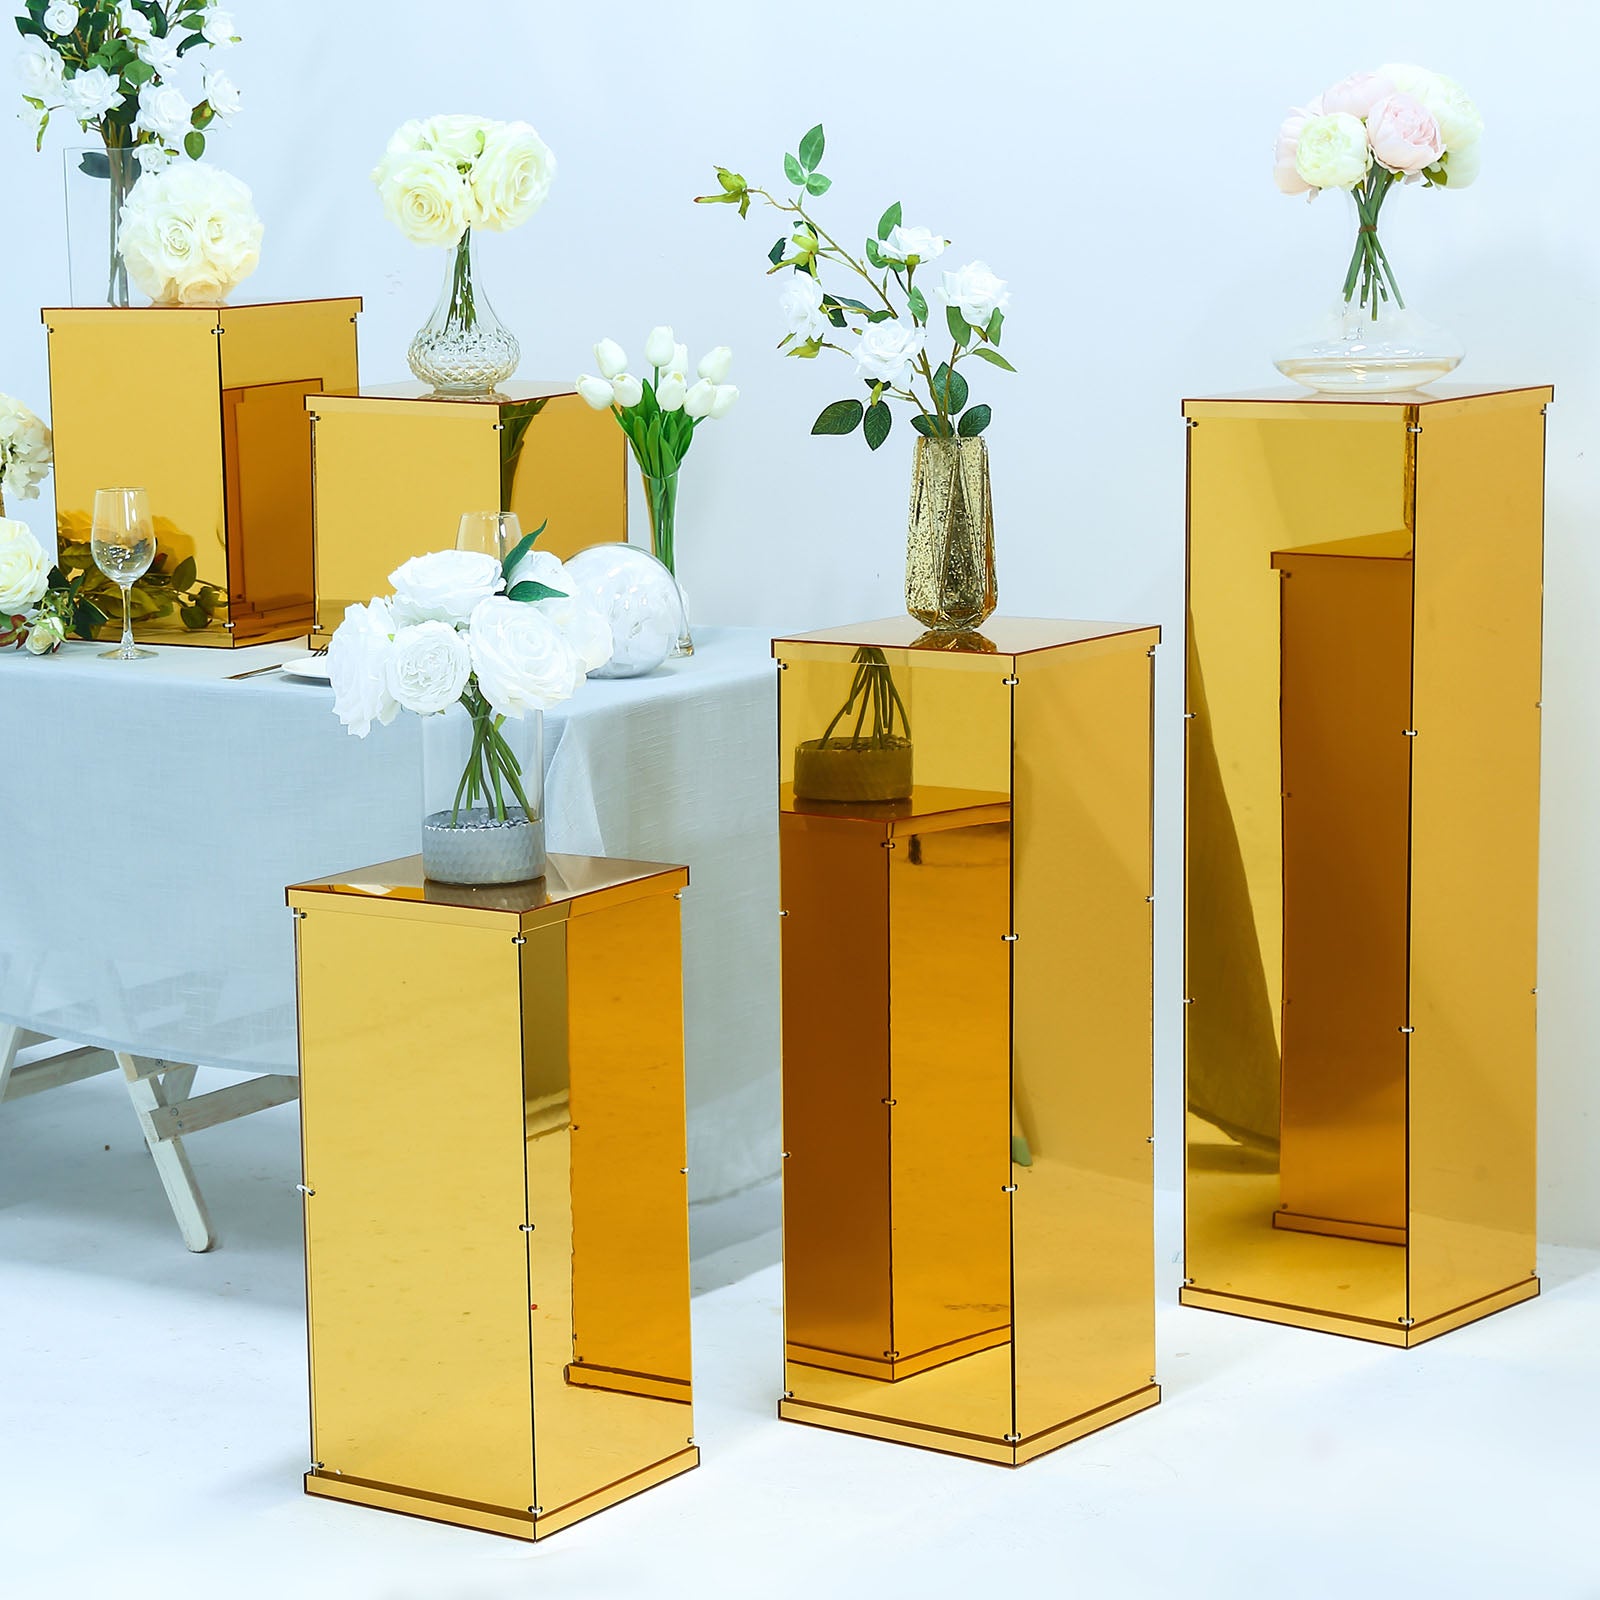 get-your-favorite-players-floor-standing-gold-mirror-finish-acrylic-pedestal-riser-display-box-with-interchangeable-lid-and-base-40-on-sale_7.jpg